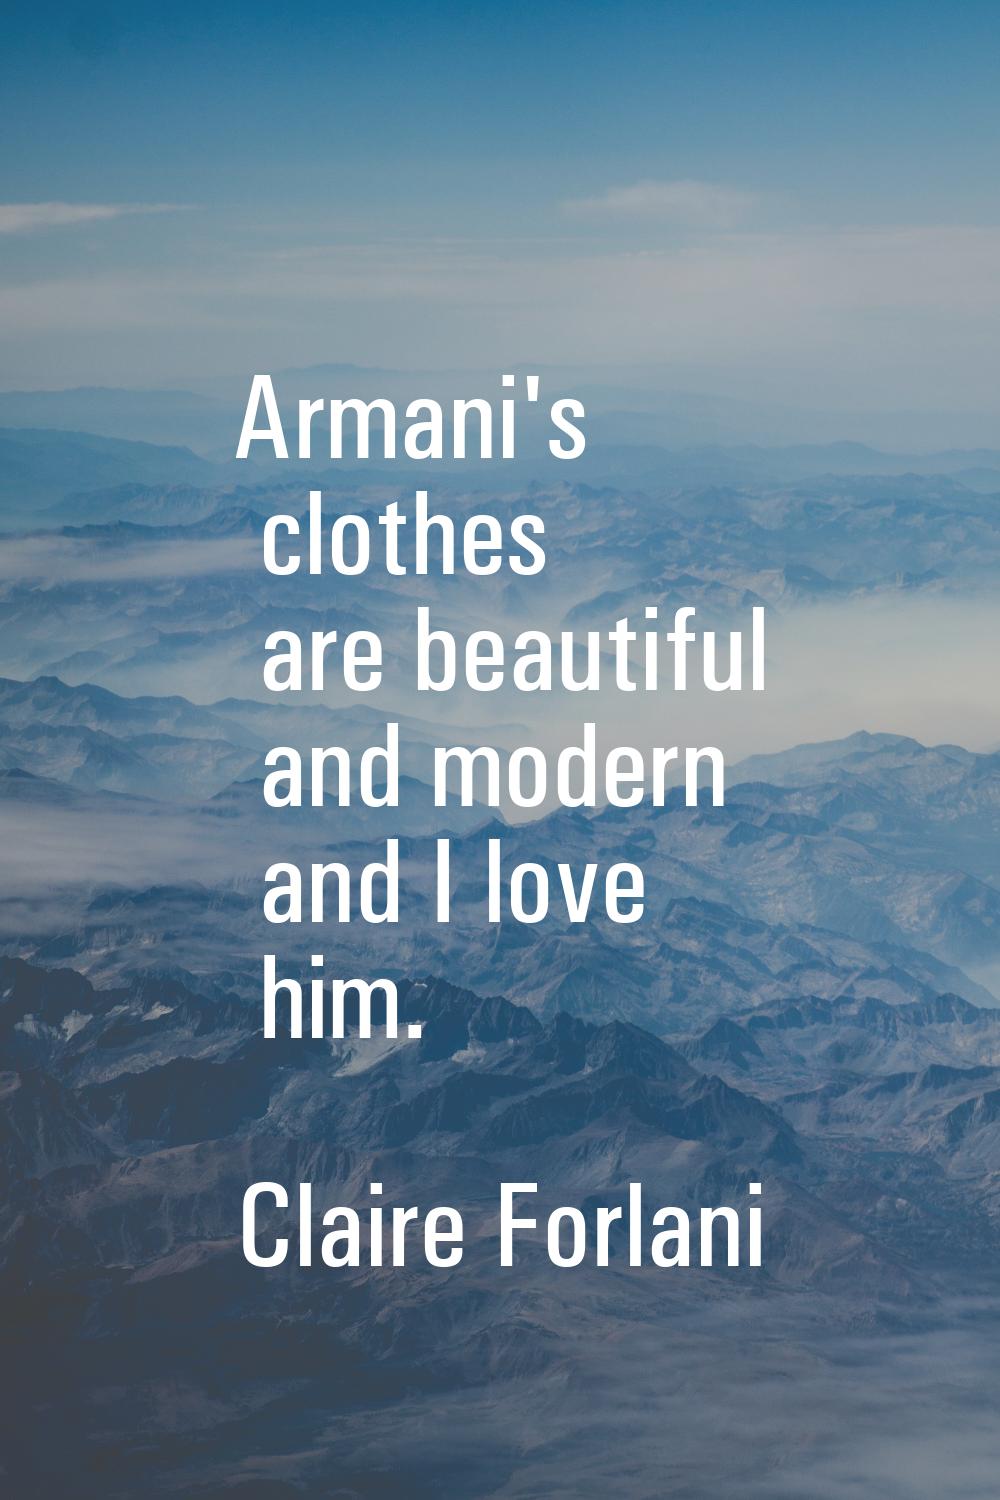 Armani's clothes are beautiful and modern and I love him.